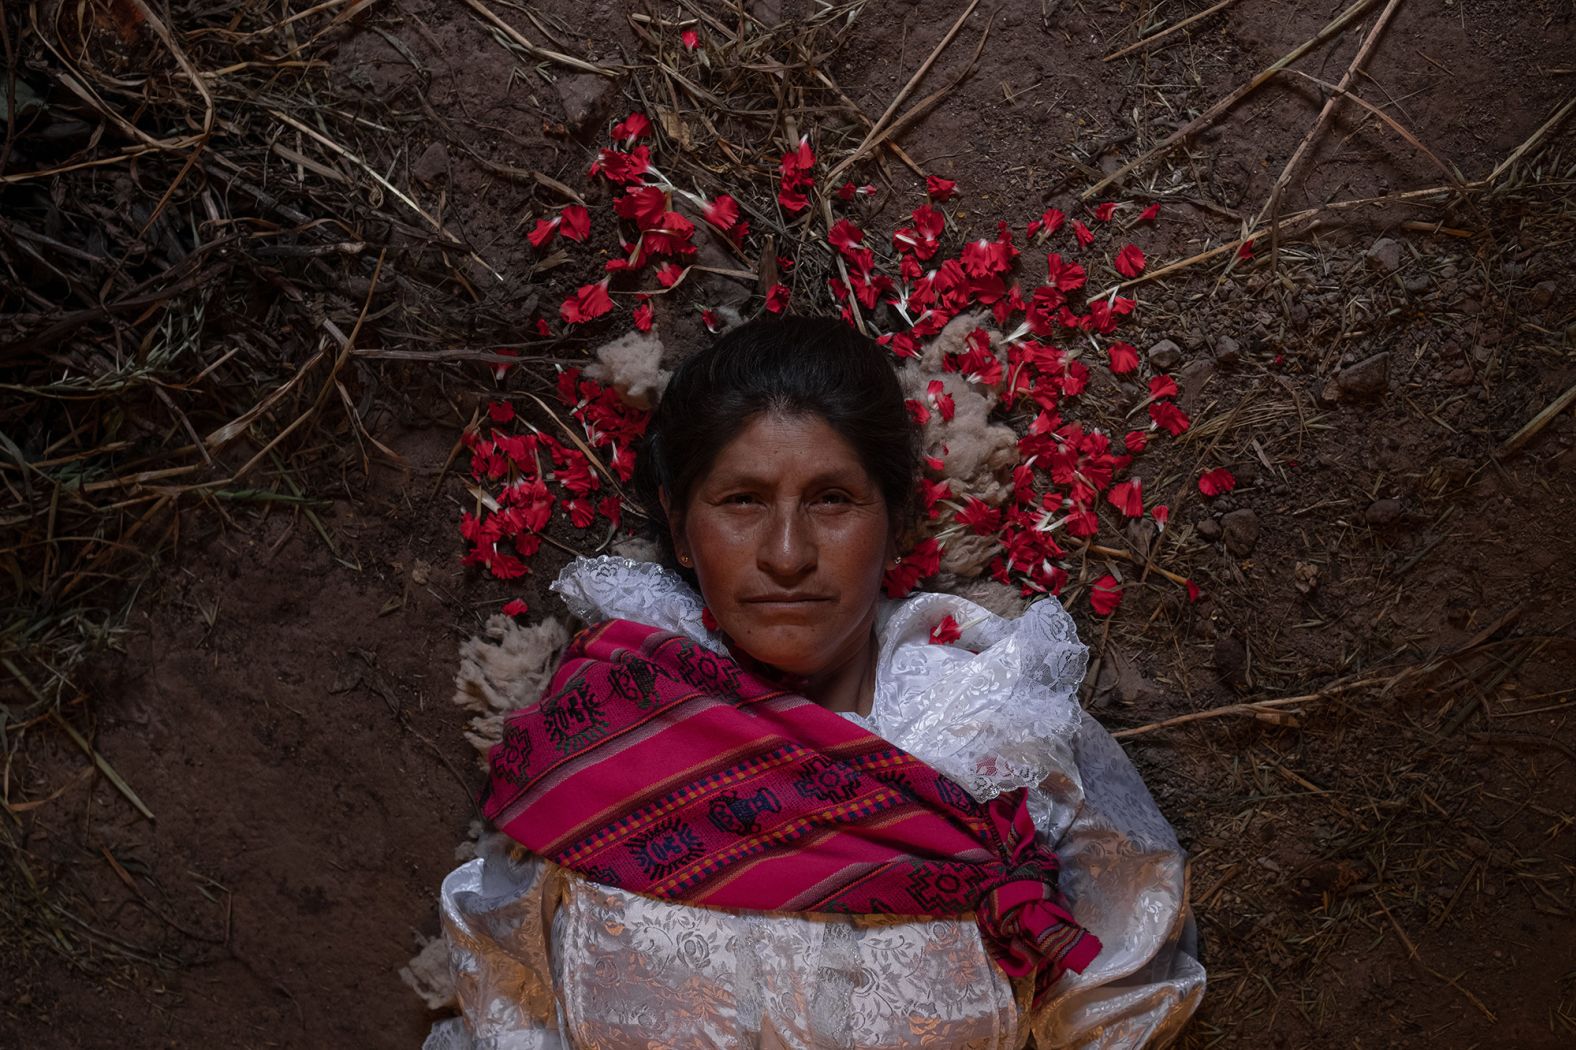 <strong>Florence Goupil, based in Cusco, Peru:</strong> Concepcion, a Quechua woman from the southern Andes in Peru, testified that she was sterilized without her consent while she was sleeping, after giving birth to her third child at the age of 28. She is one of <a href="index.php?page=&url=https%3A%2F%2Fwww.bbc.co.uk%2Fnews%2Fworld-latin-america-56201575" target="_blank" target="_blank">thousands of women who say they were victims of forced sterilizations</a> between 1996 and 2000 as part of a reproductive health programme run by the government of then-President, Alberto Fuijimori. [Fujimori has claimed all sterilizations were consensual.]<br /> <br />I received the news of this assignment with mixed feelings: solemn but also joyful at the possibility of dealing with this important topic from my point of view. I wanted to show the injustice Quechua women have been living with for more than 25 years, but also to represent them with dignity. To do so, I first took into account my own history, as all the women in my family are of Quechua descent.<br /> <br />Everywhere I have gone in Peru, I have encountered countless women who have been sterilized. This portrait of Concepcion represents, for me, the women who raised their voices in defense of their human rights and it's also a call to those who remain hidden.